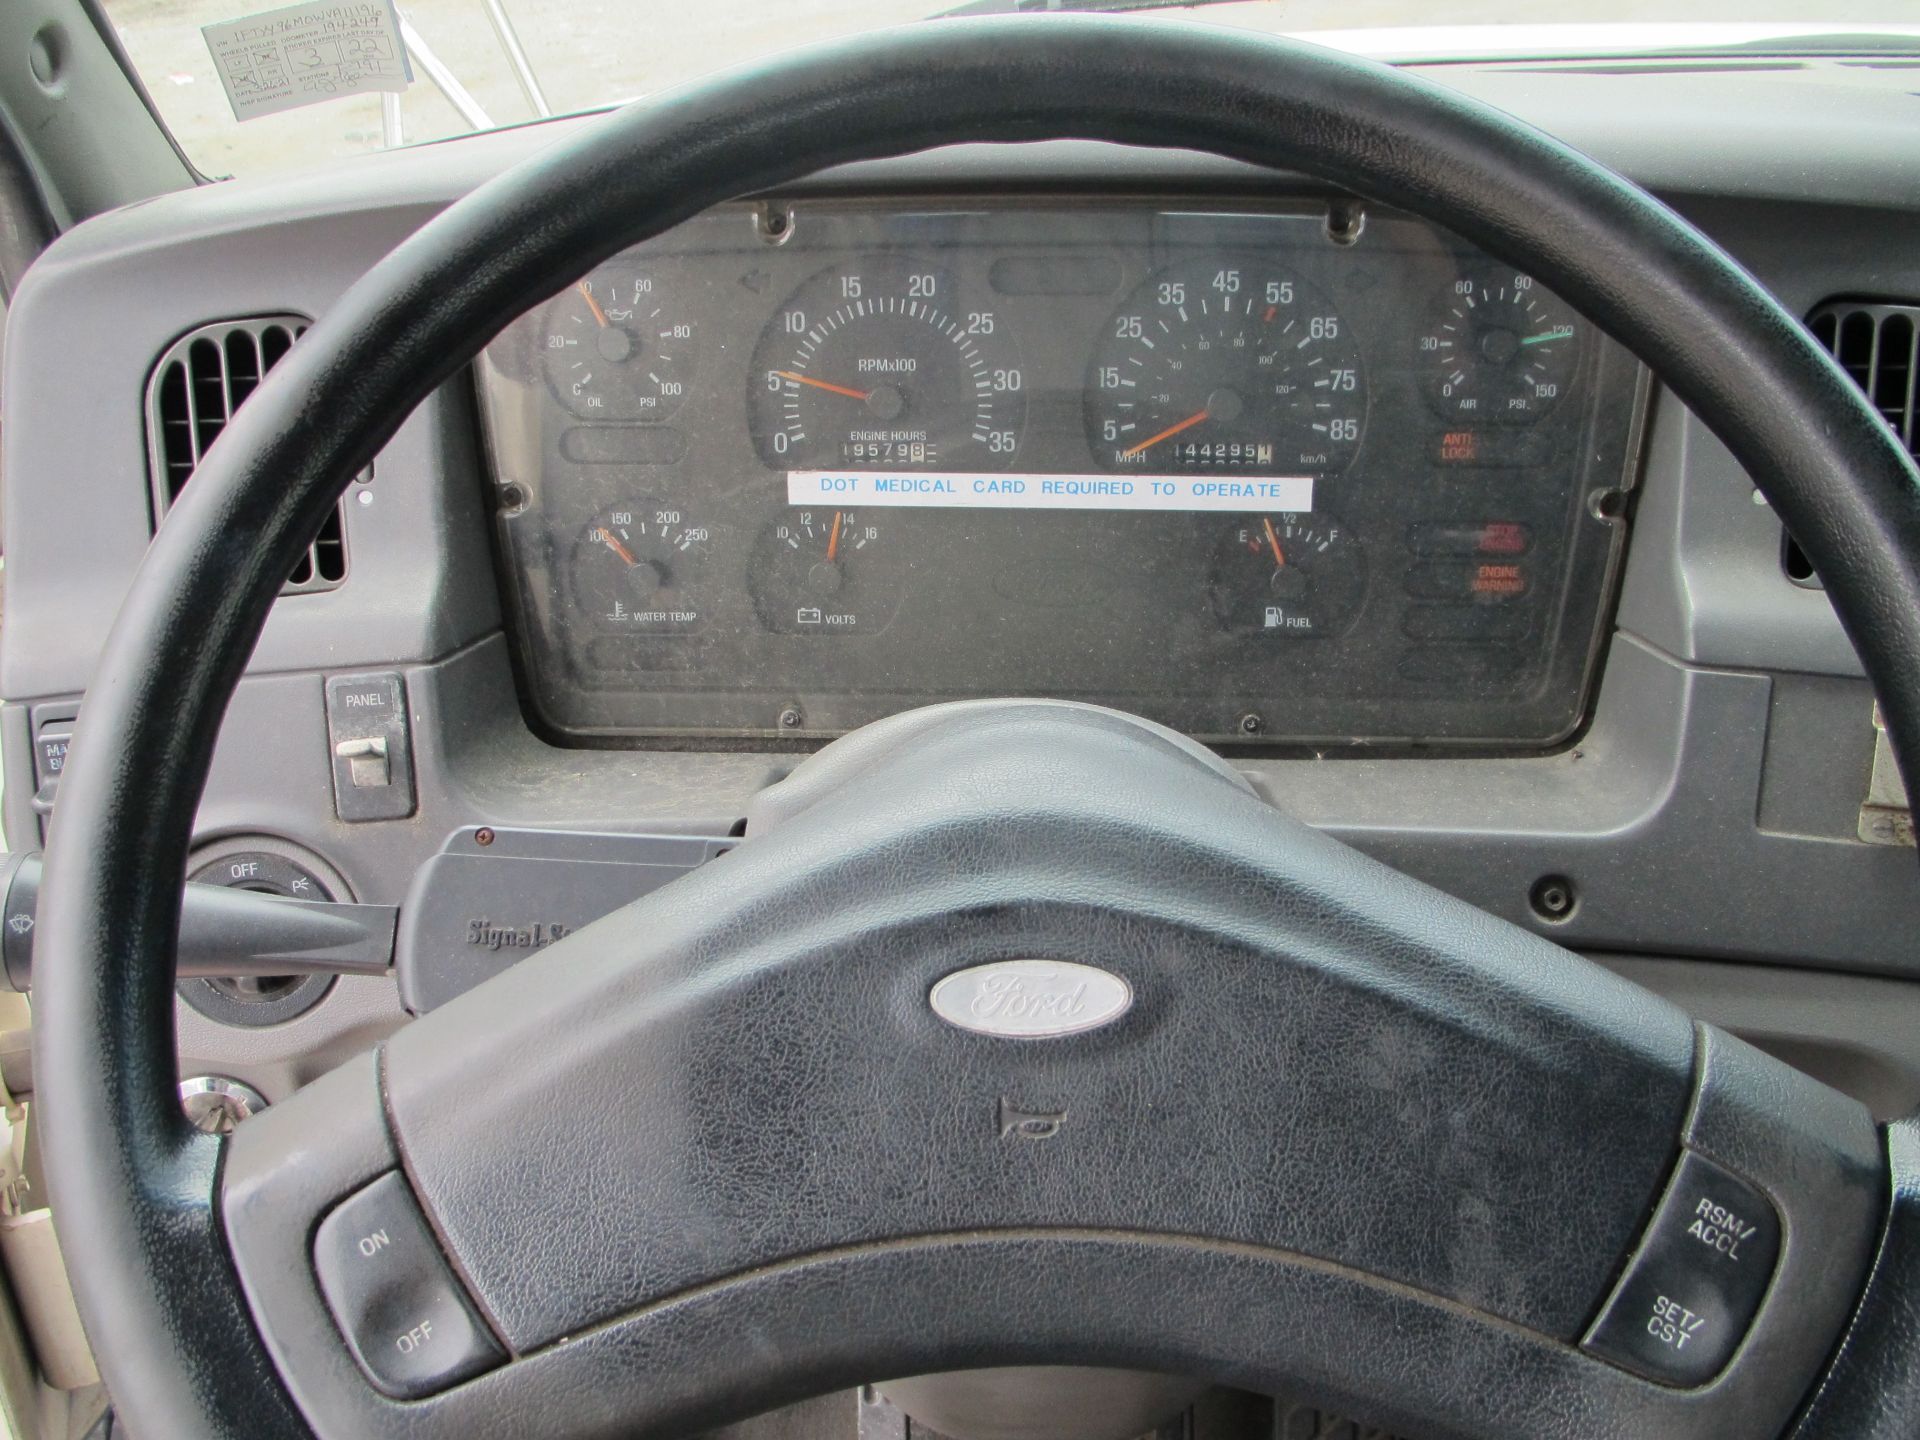 1998 Ford AT9513 Aeromax Tractor Trailer Truck - Image 11 of 15